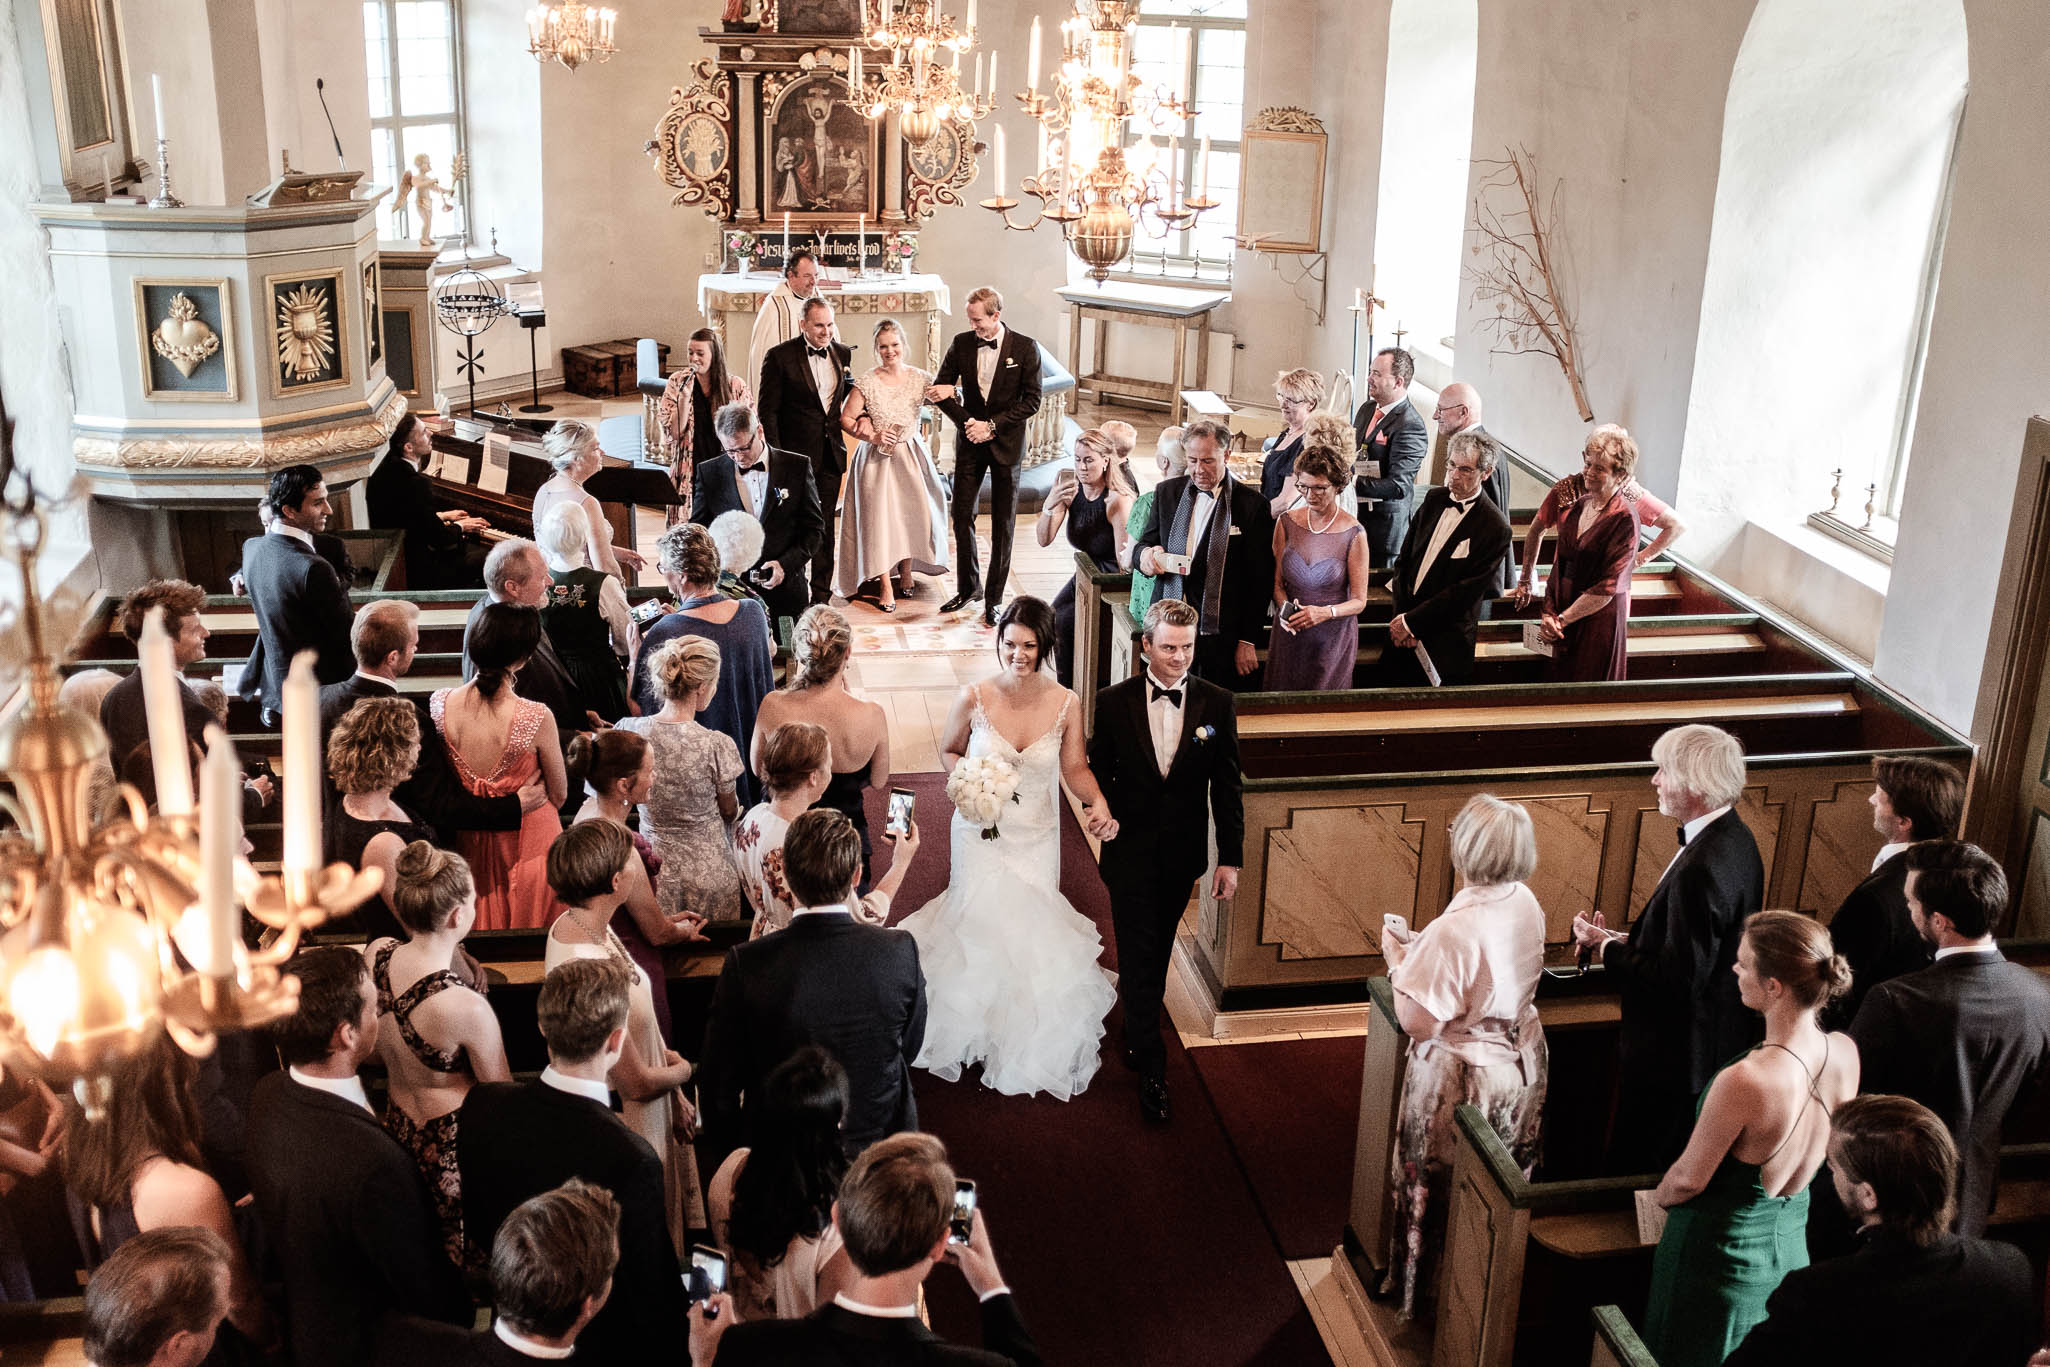 Click to enlarge image linnchristin-andreas-hallsnas-ottossonphoto-1018.jpg